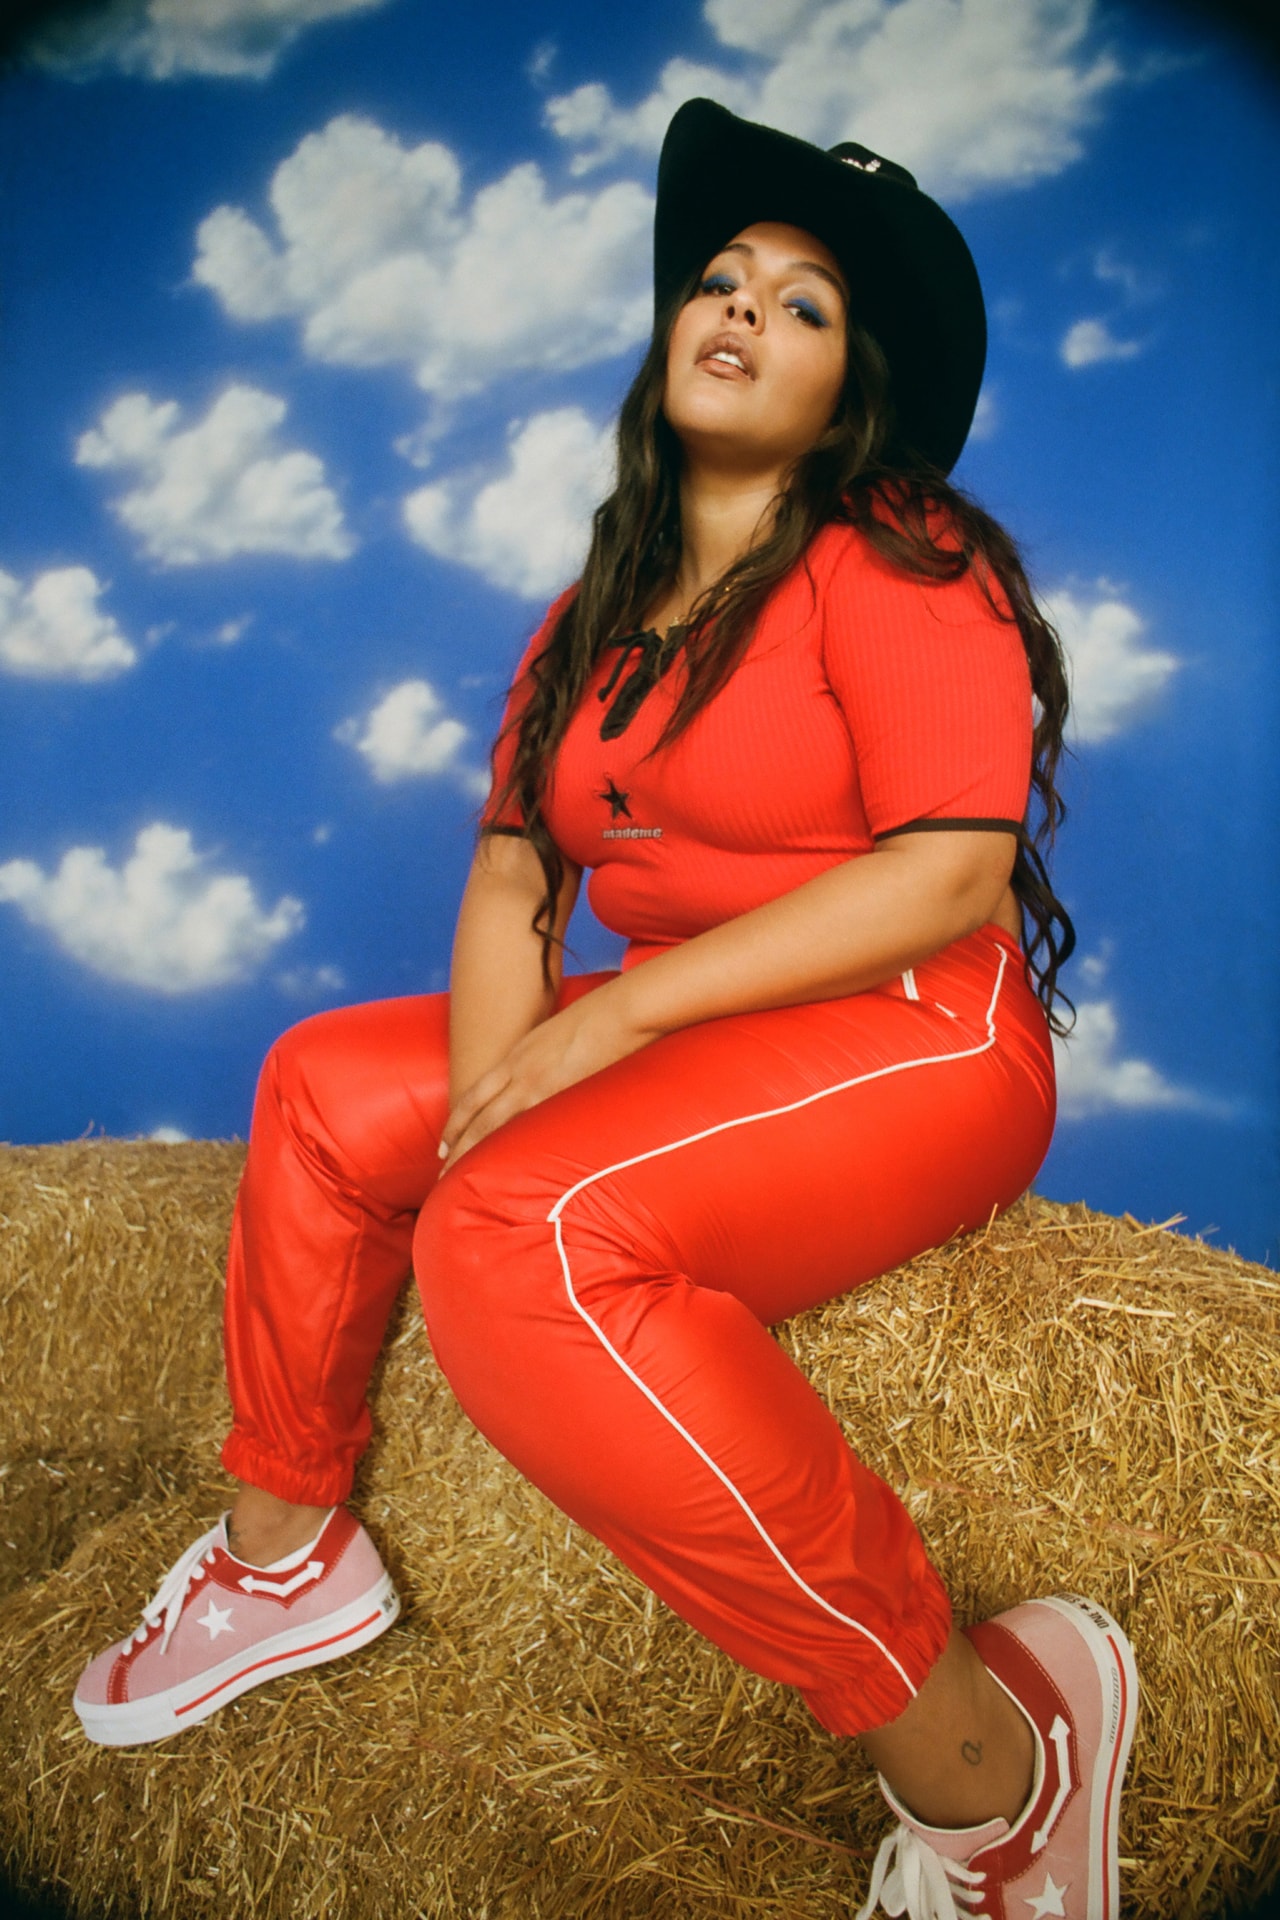 MadeMe x Converse Collaboration Paloma Elsesser One Star Pink Shirt Pants Red Campaign